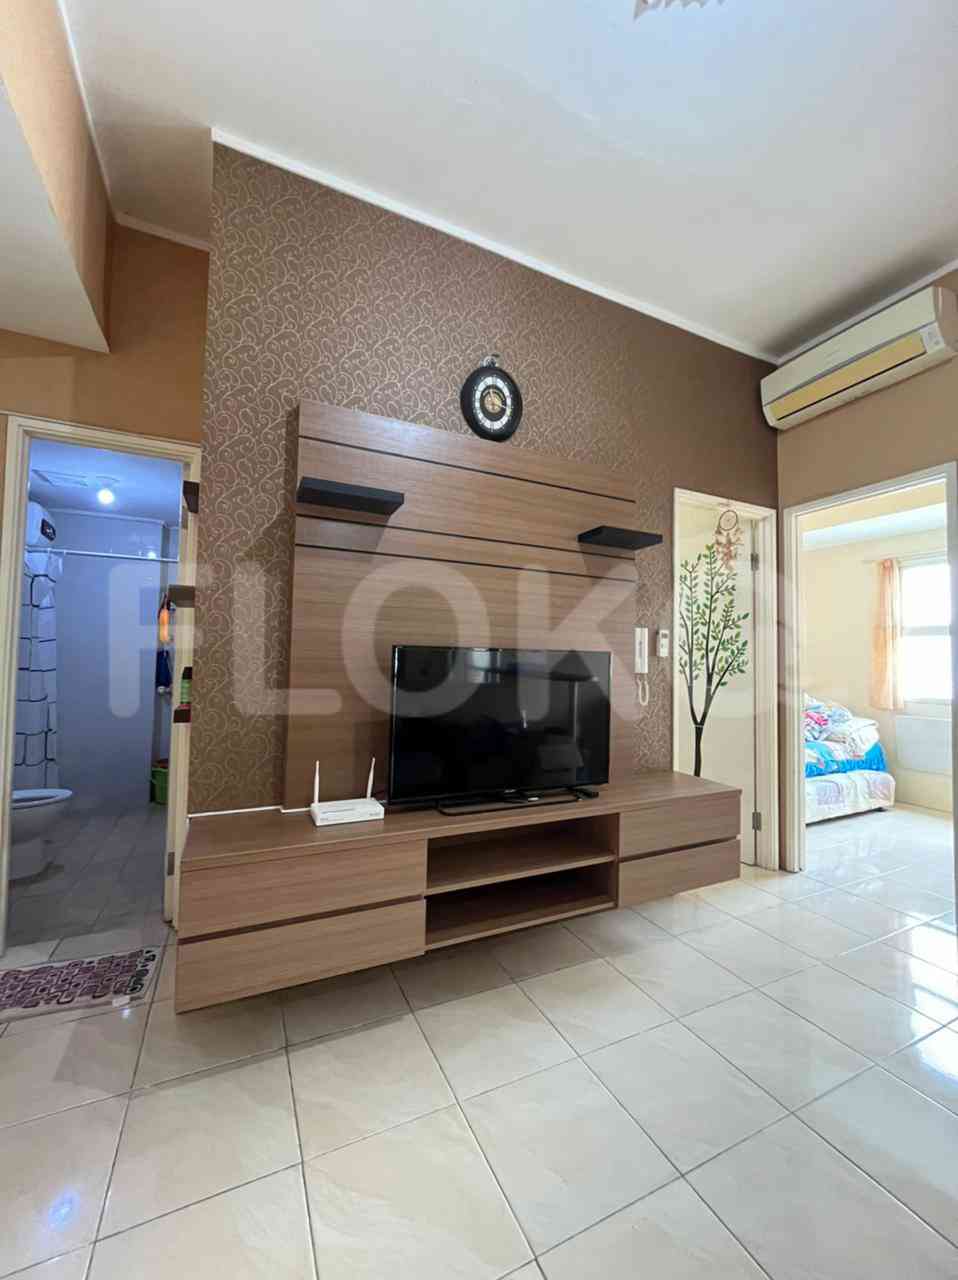 2 Bedroom on 26th Floor for Rent in Seasons City Apartment - fgrba5 10